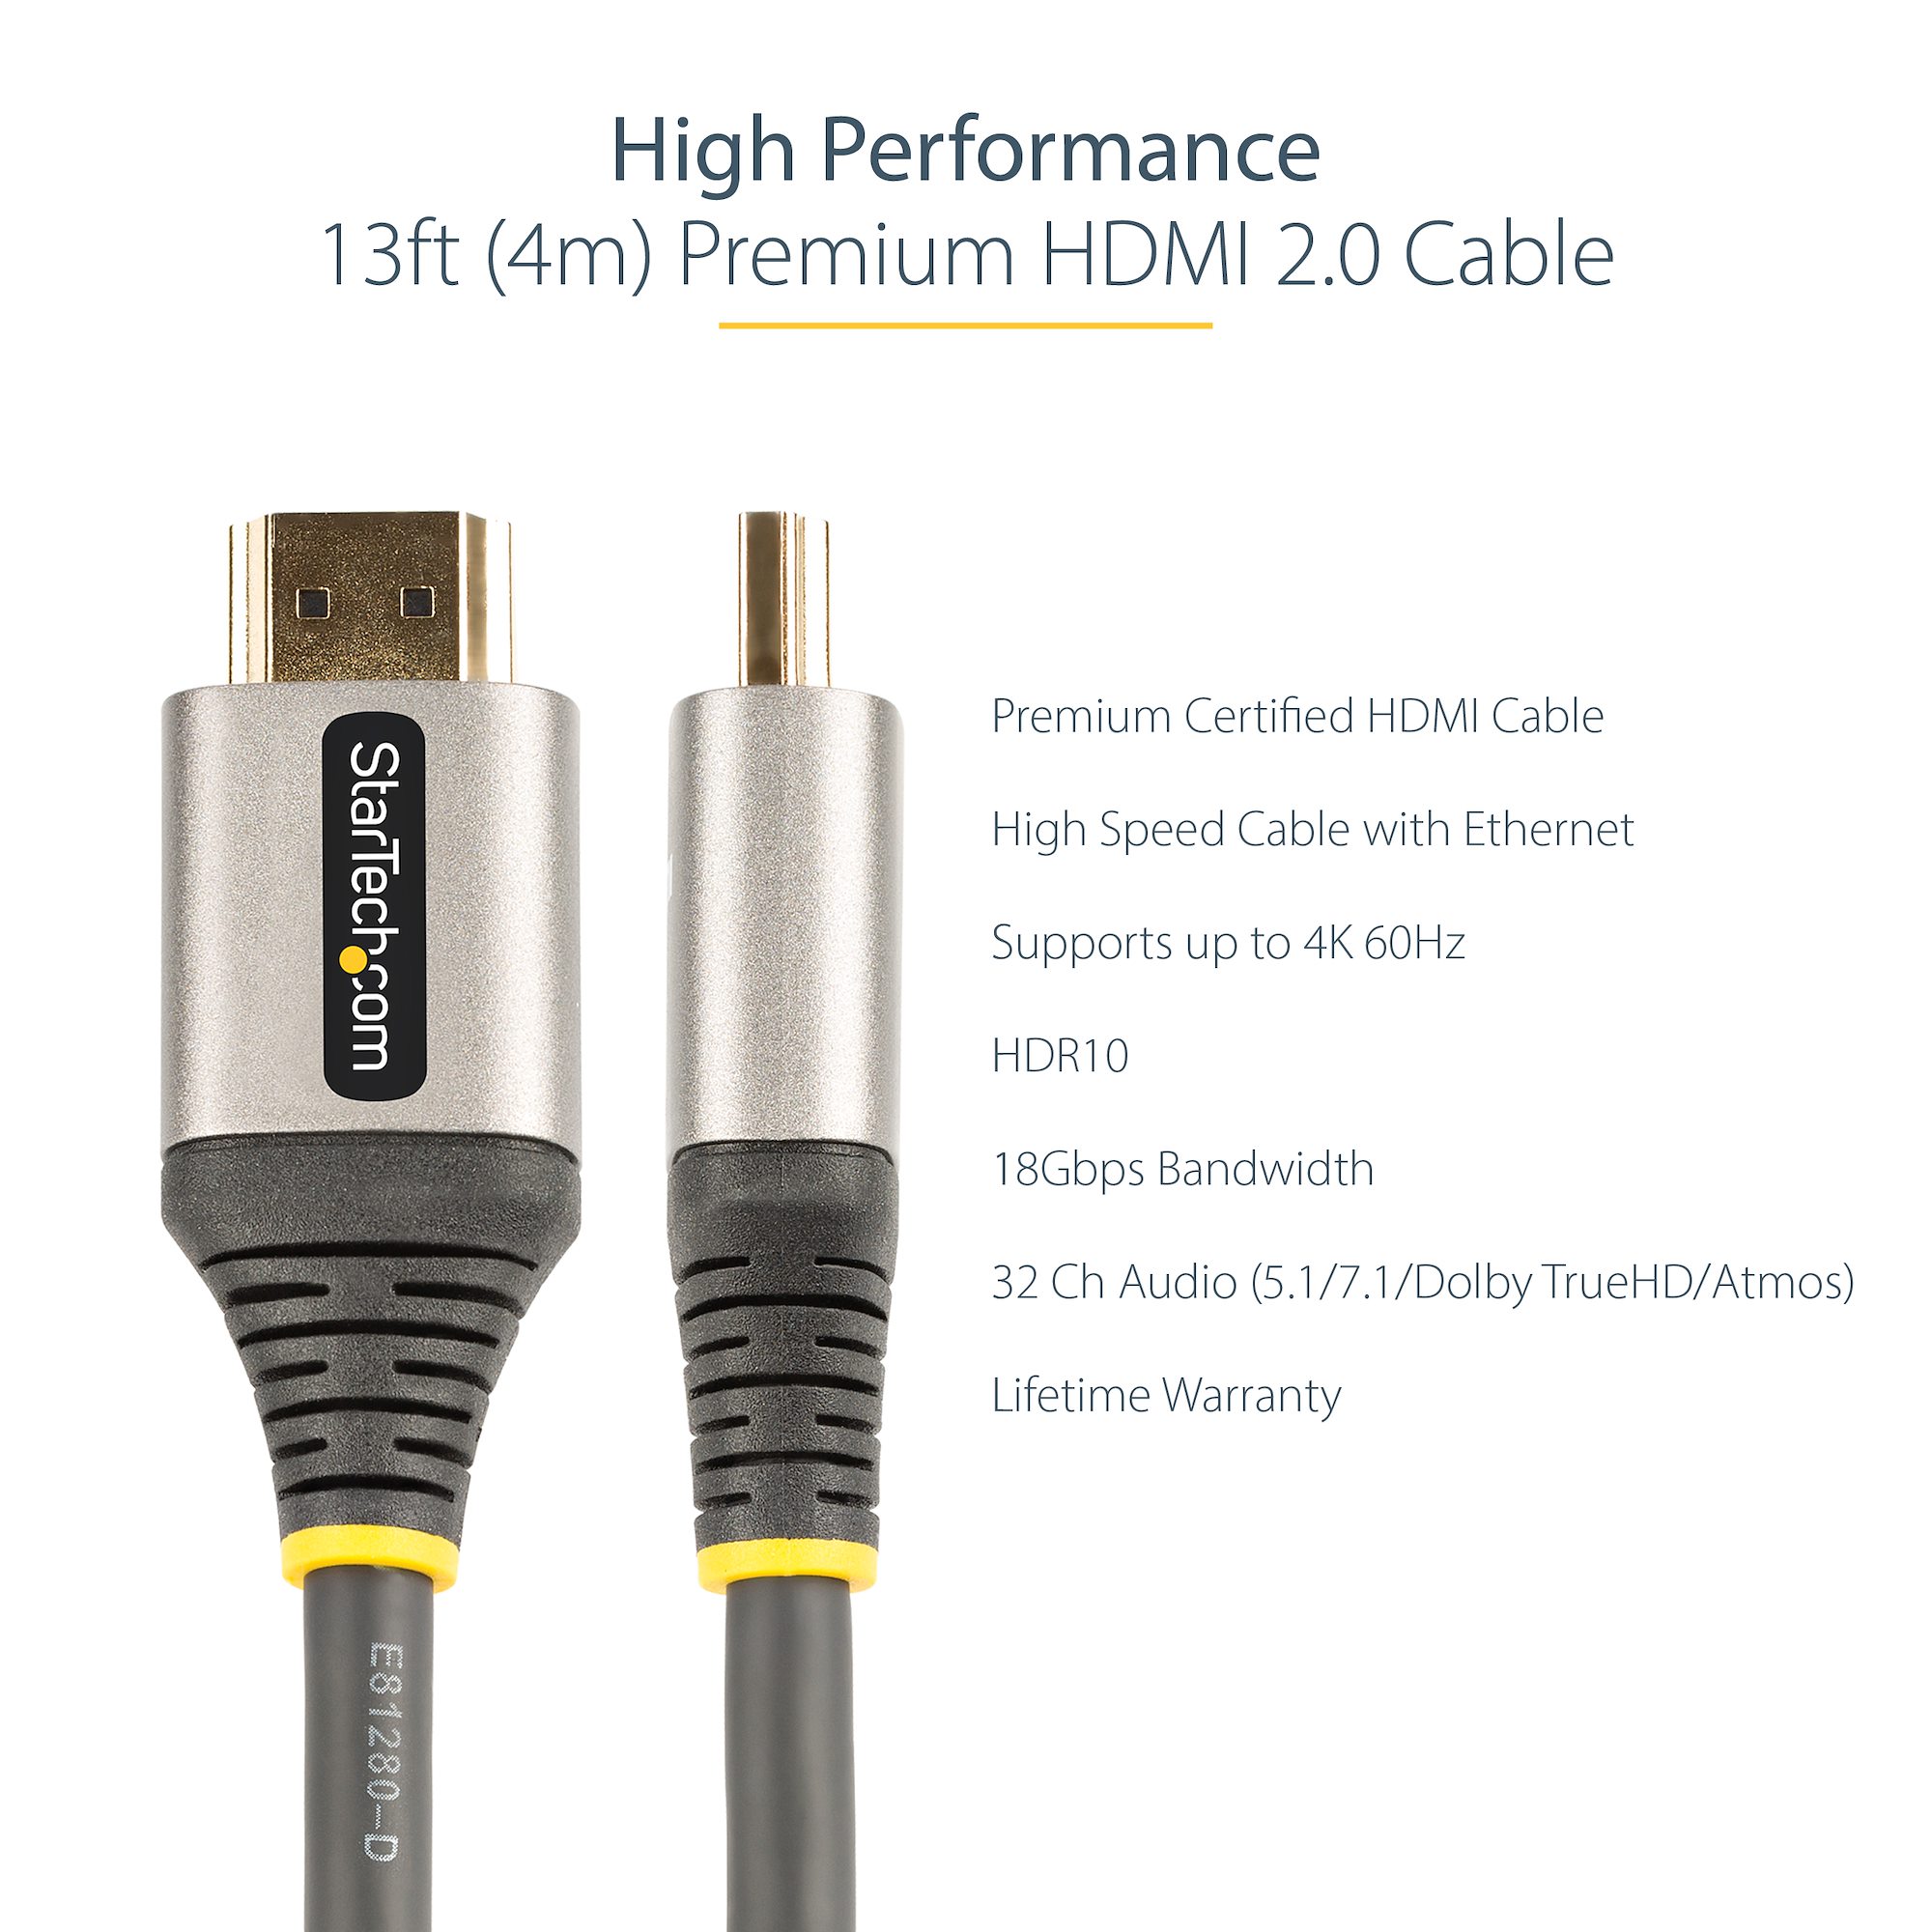 10ft (3m) Premium Certified HDMI 2.0 Cable - High Speed Ultra HD 4K 60Hz  HDMI Cable with Ethernet - HDR10, ARC - TPE Jacket - UHD HDMI Video Cord 